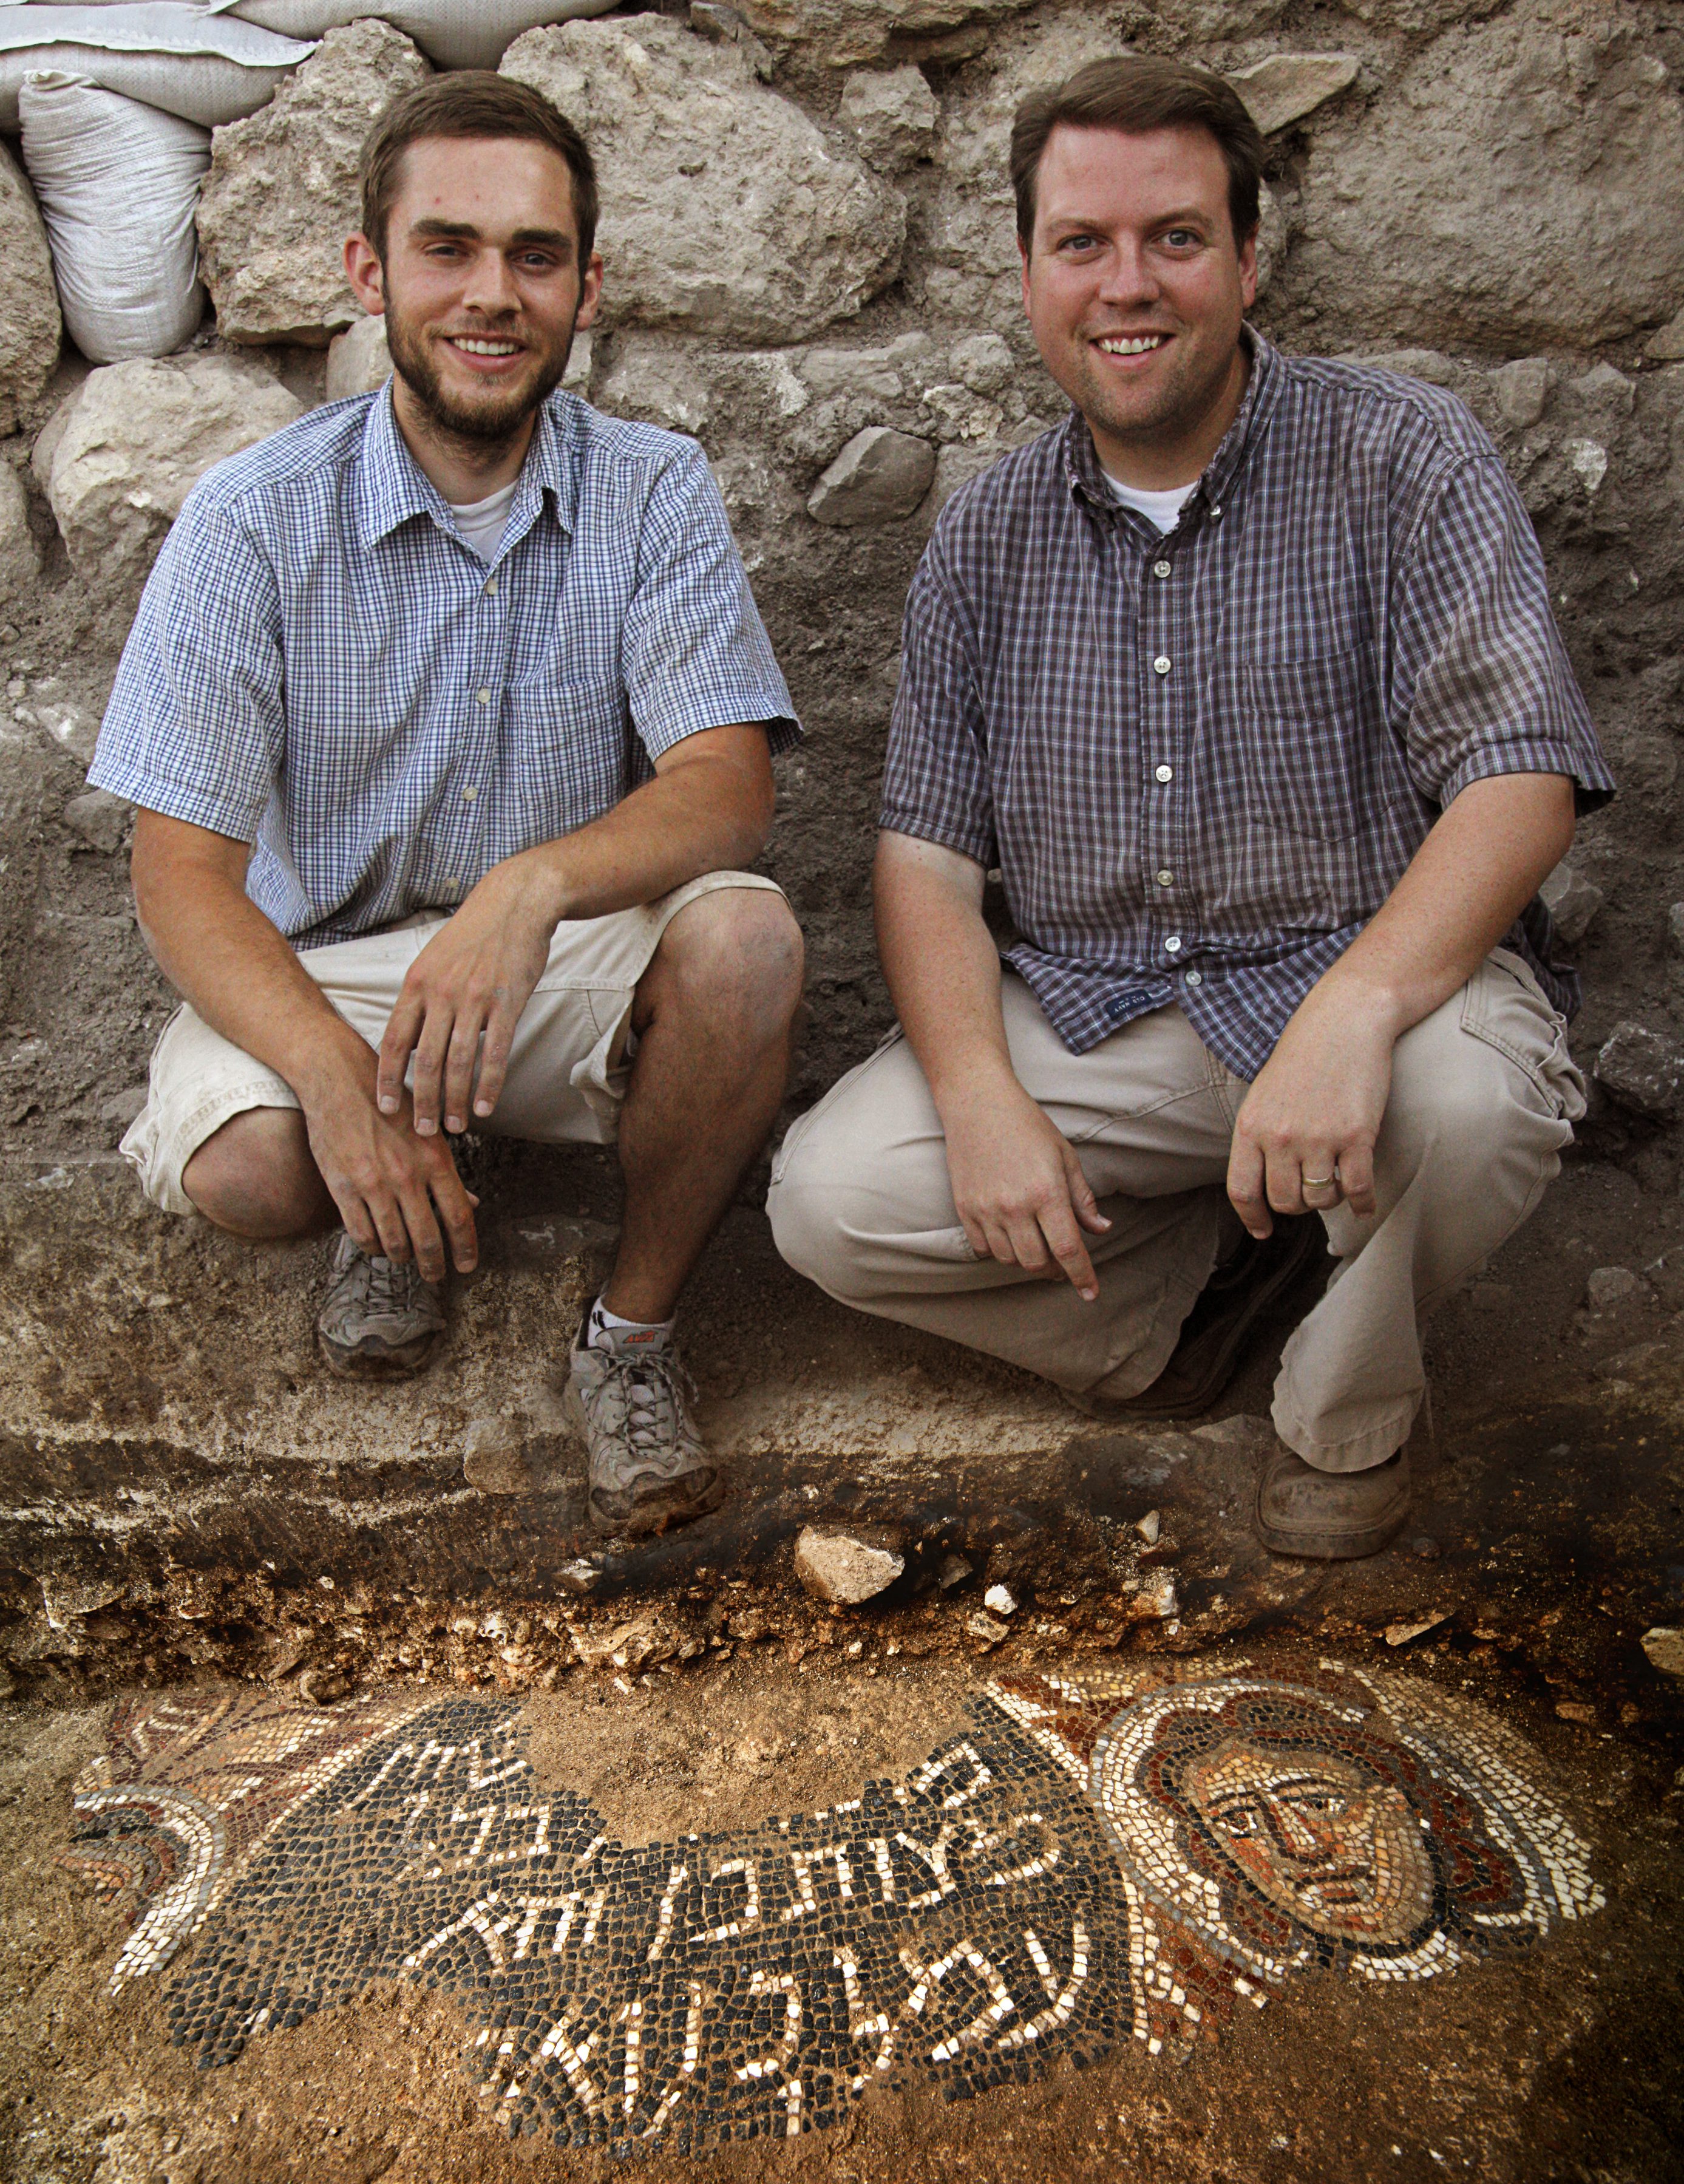 Recent BYU grad Bryan Bozung poses with BYU ancient scripture professor Matthew Grey beside an ancient mosaic that he discovered on an archaeological dig in the ancient synagogue at Huqoq, near Galilee.